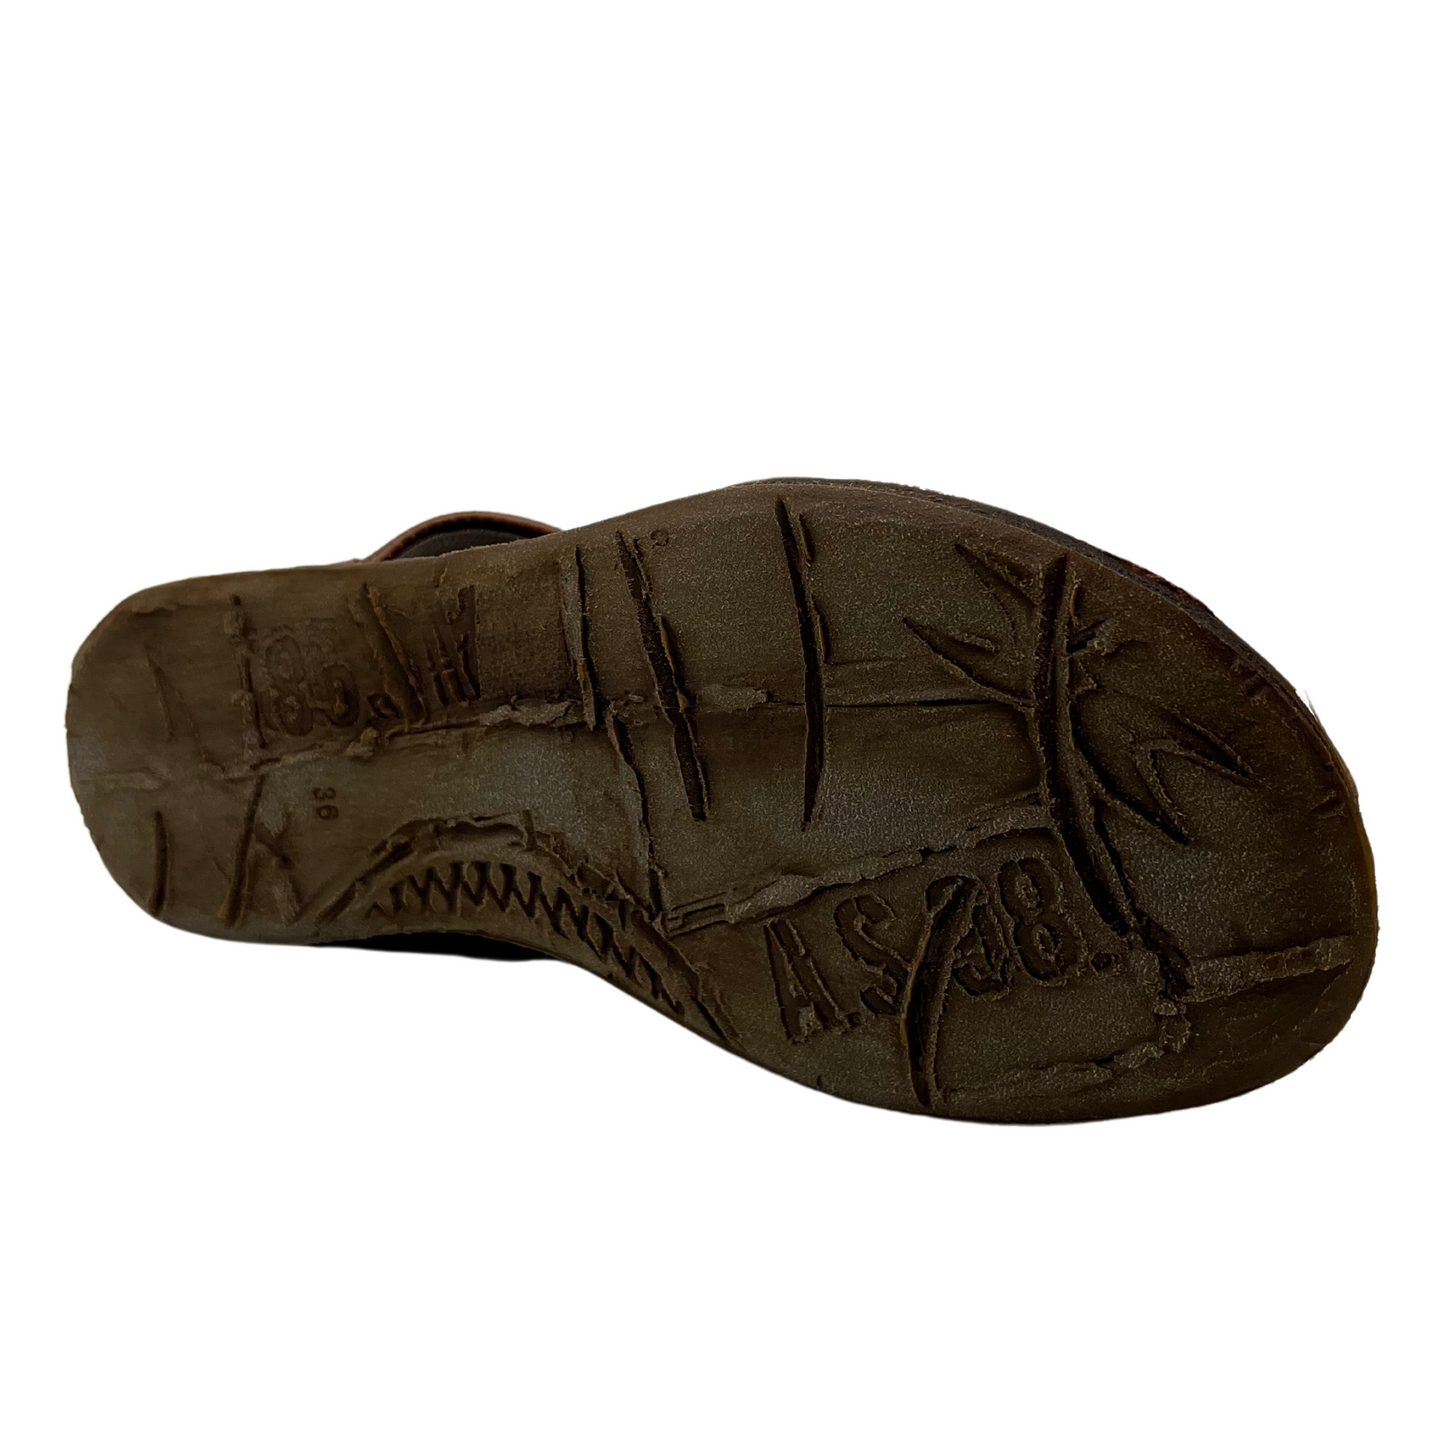 Bottom view of brown leather sandal with flat bottom sole